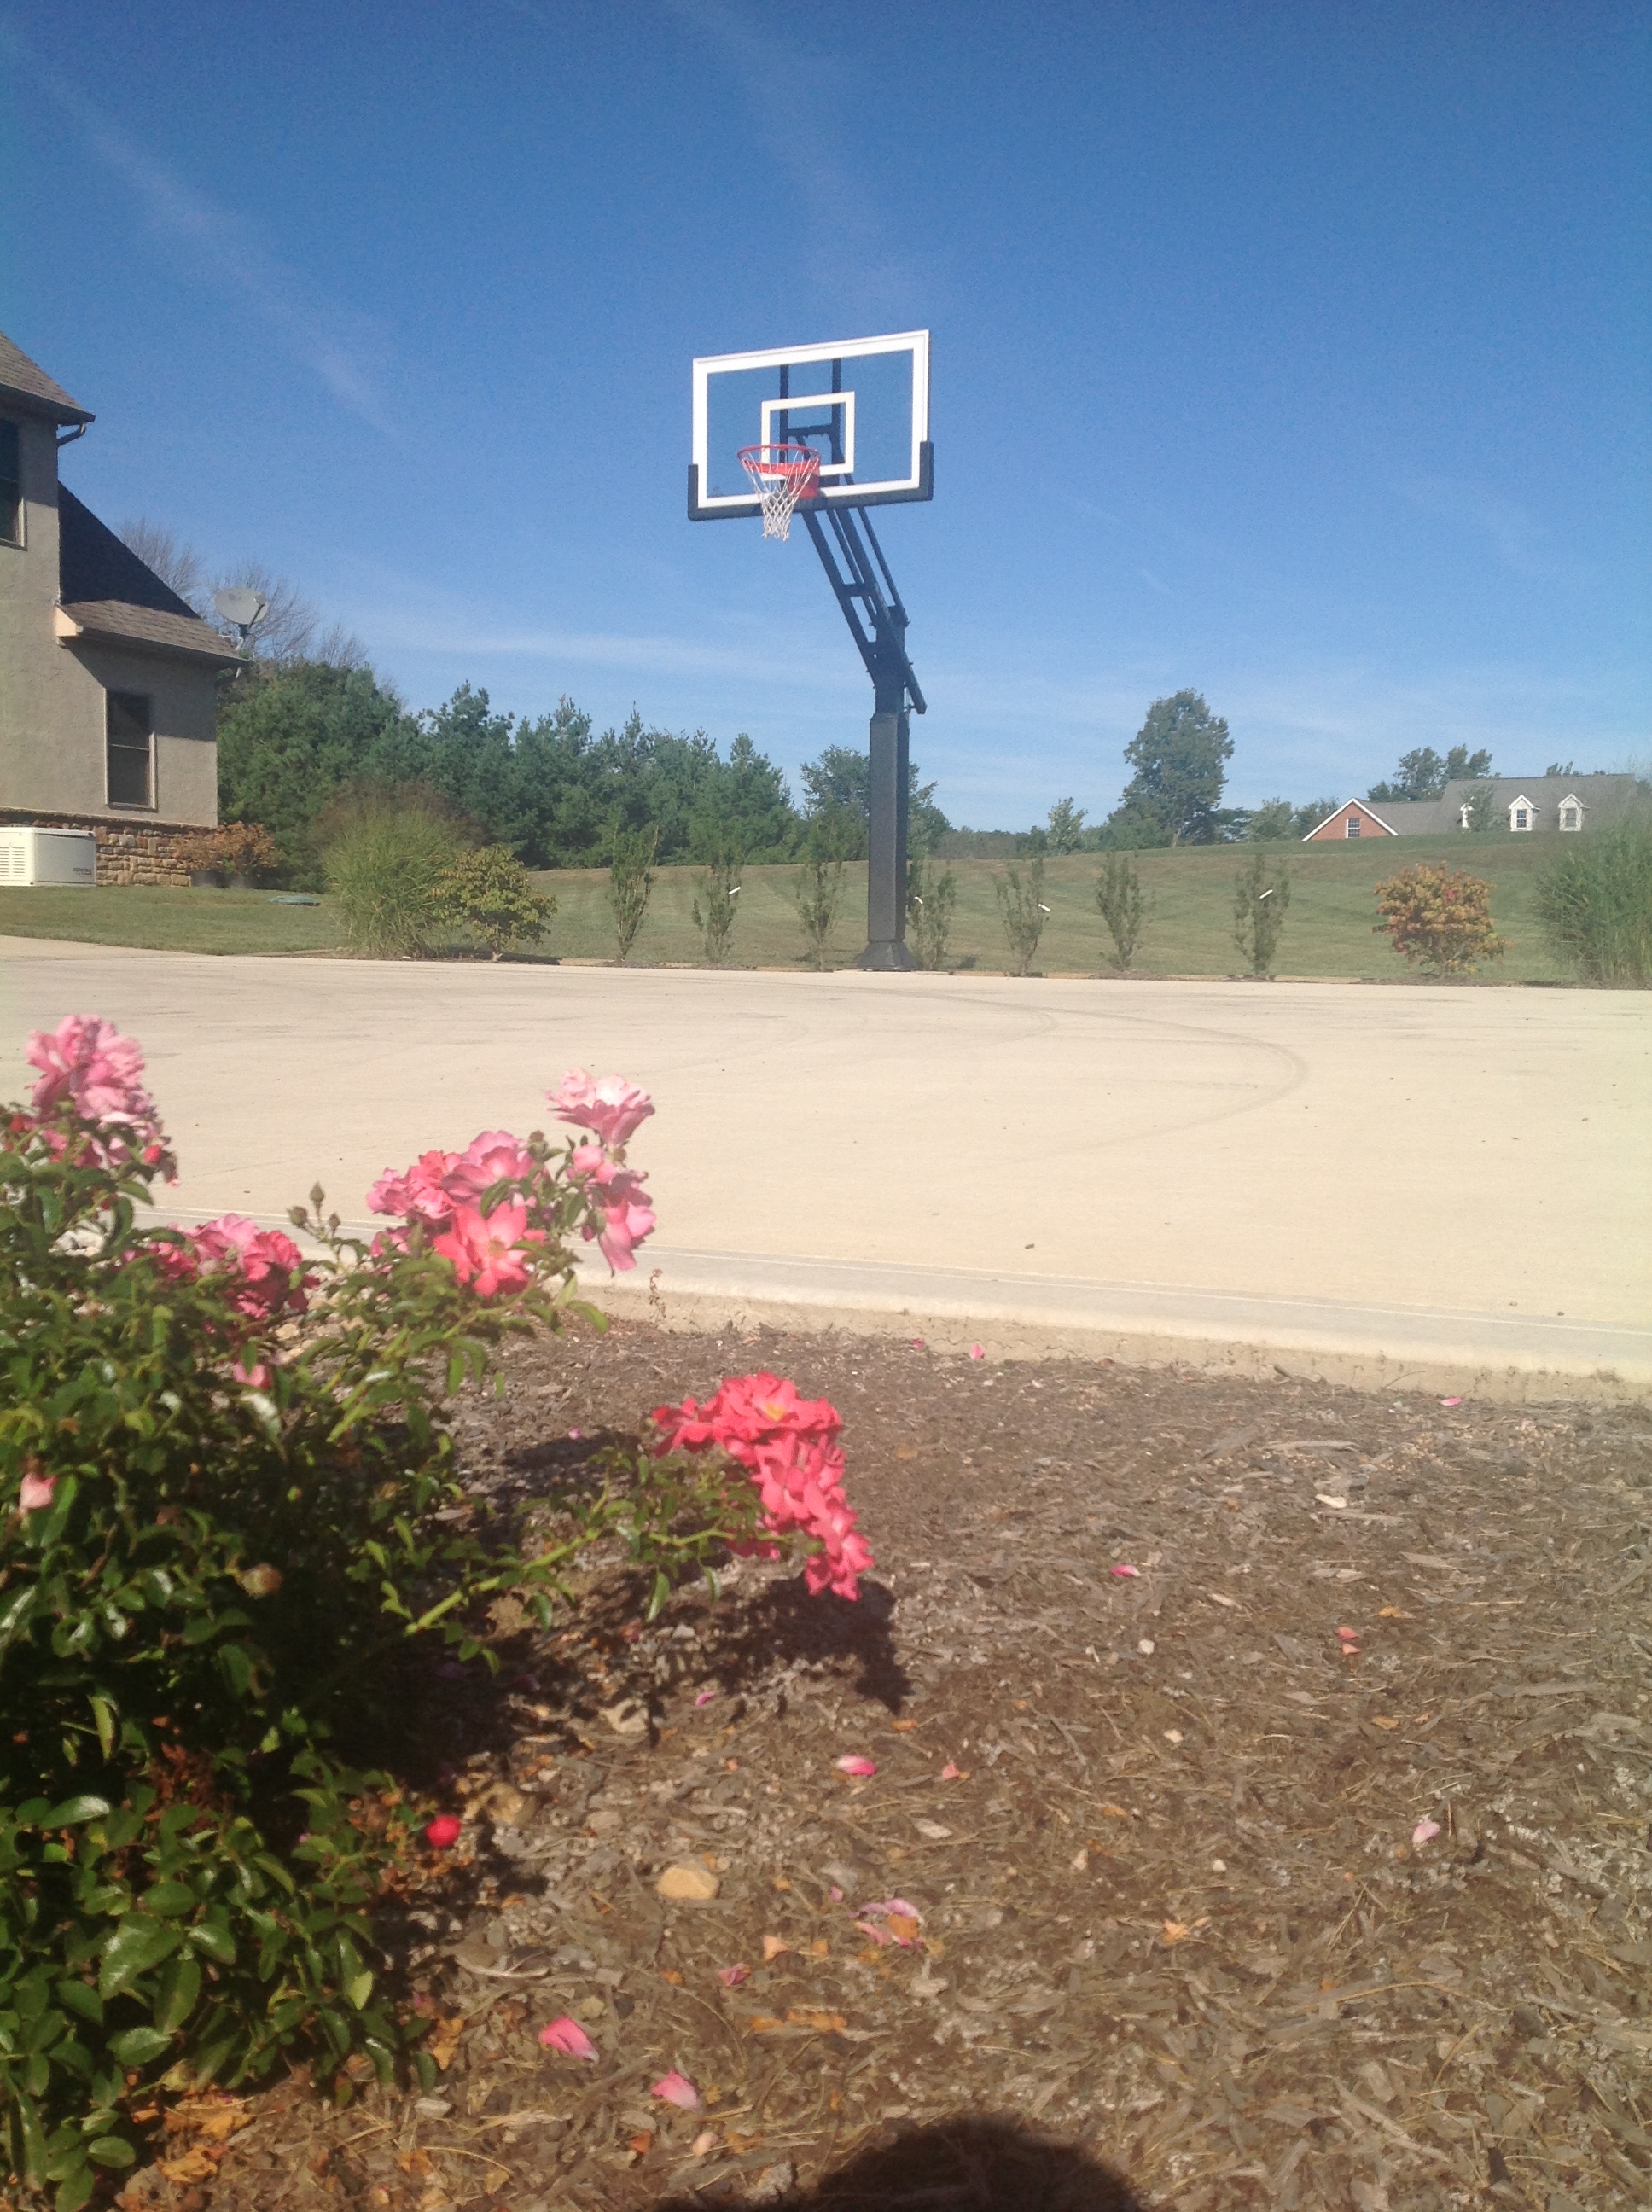 This hoop with trees in the background and flowers in the foreground has gotta please Mom, Dad, and kids.